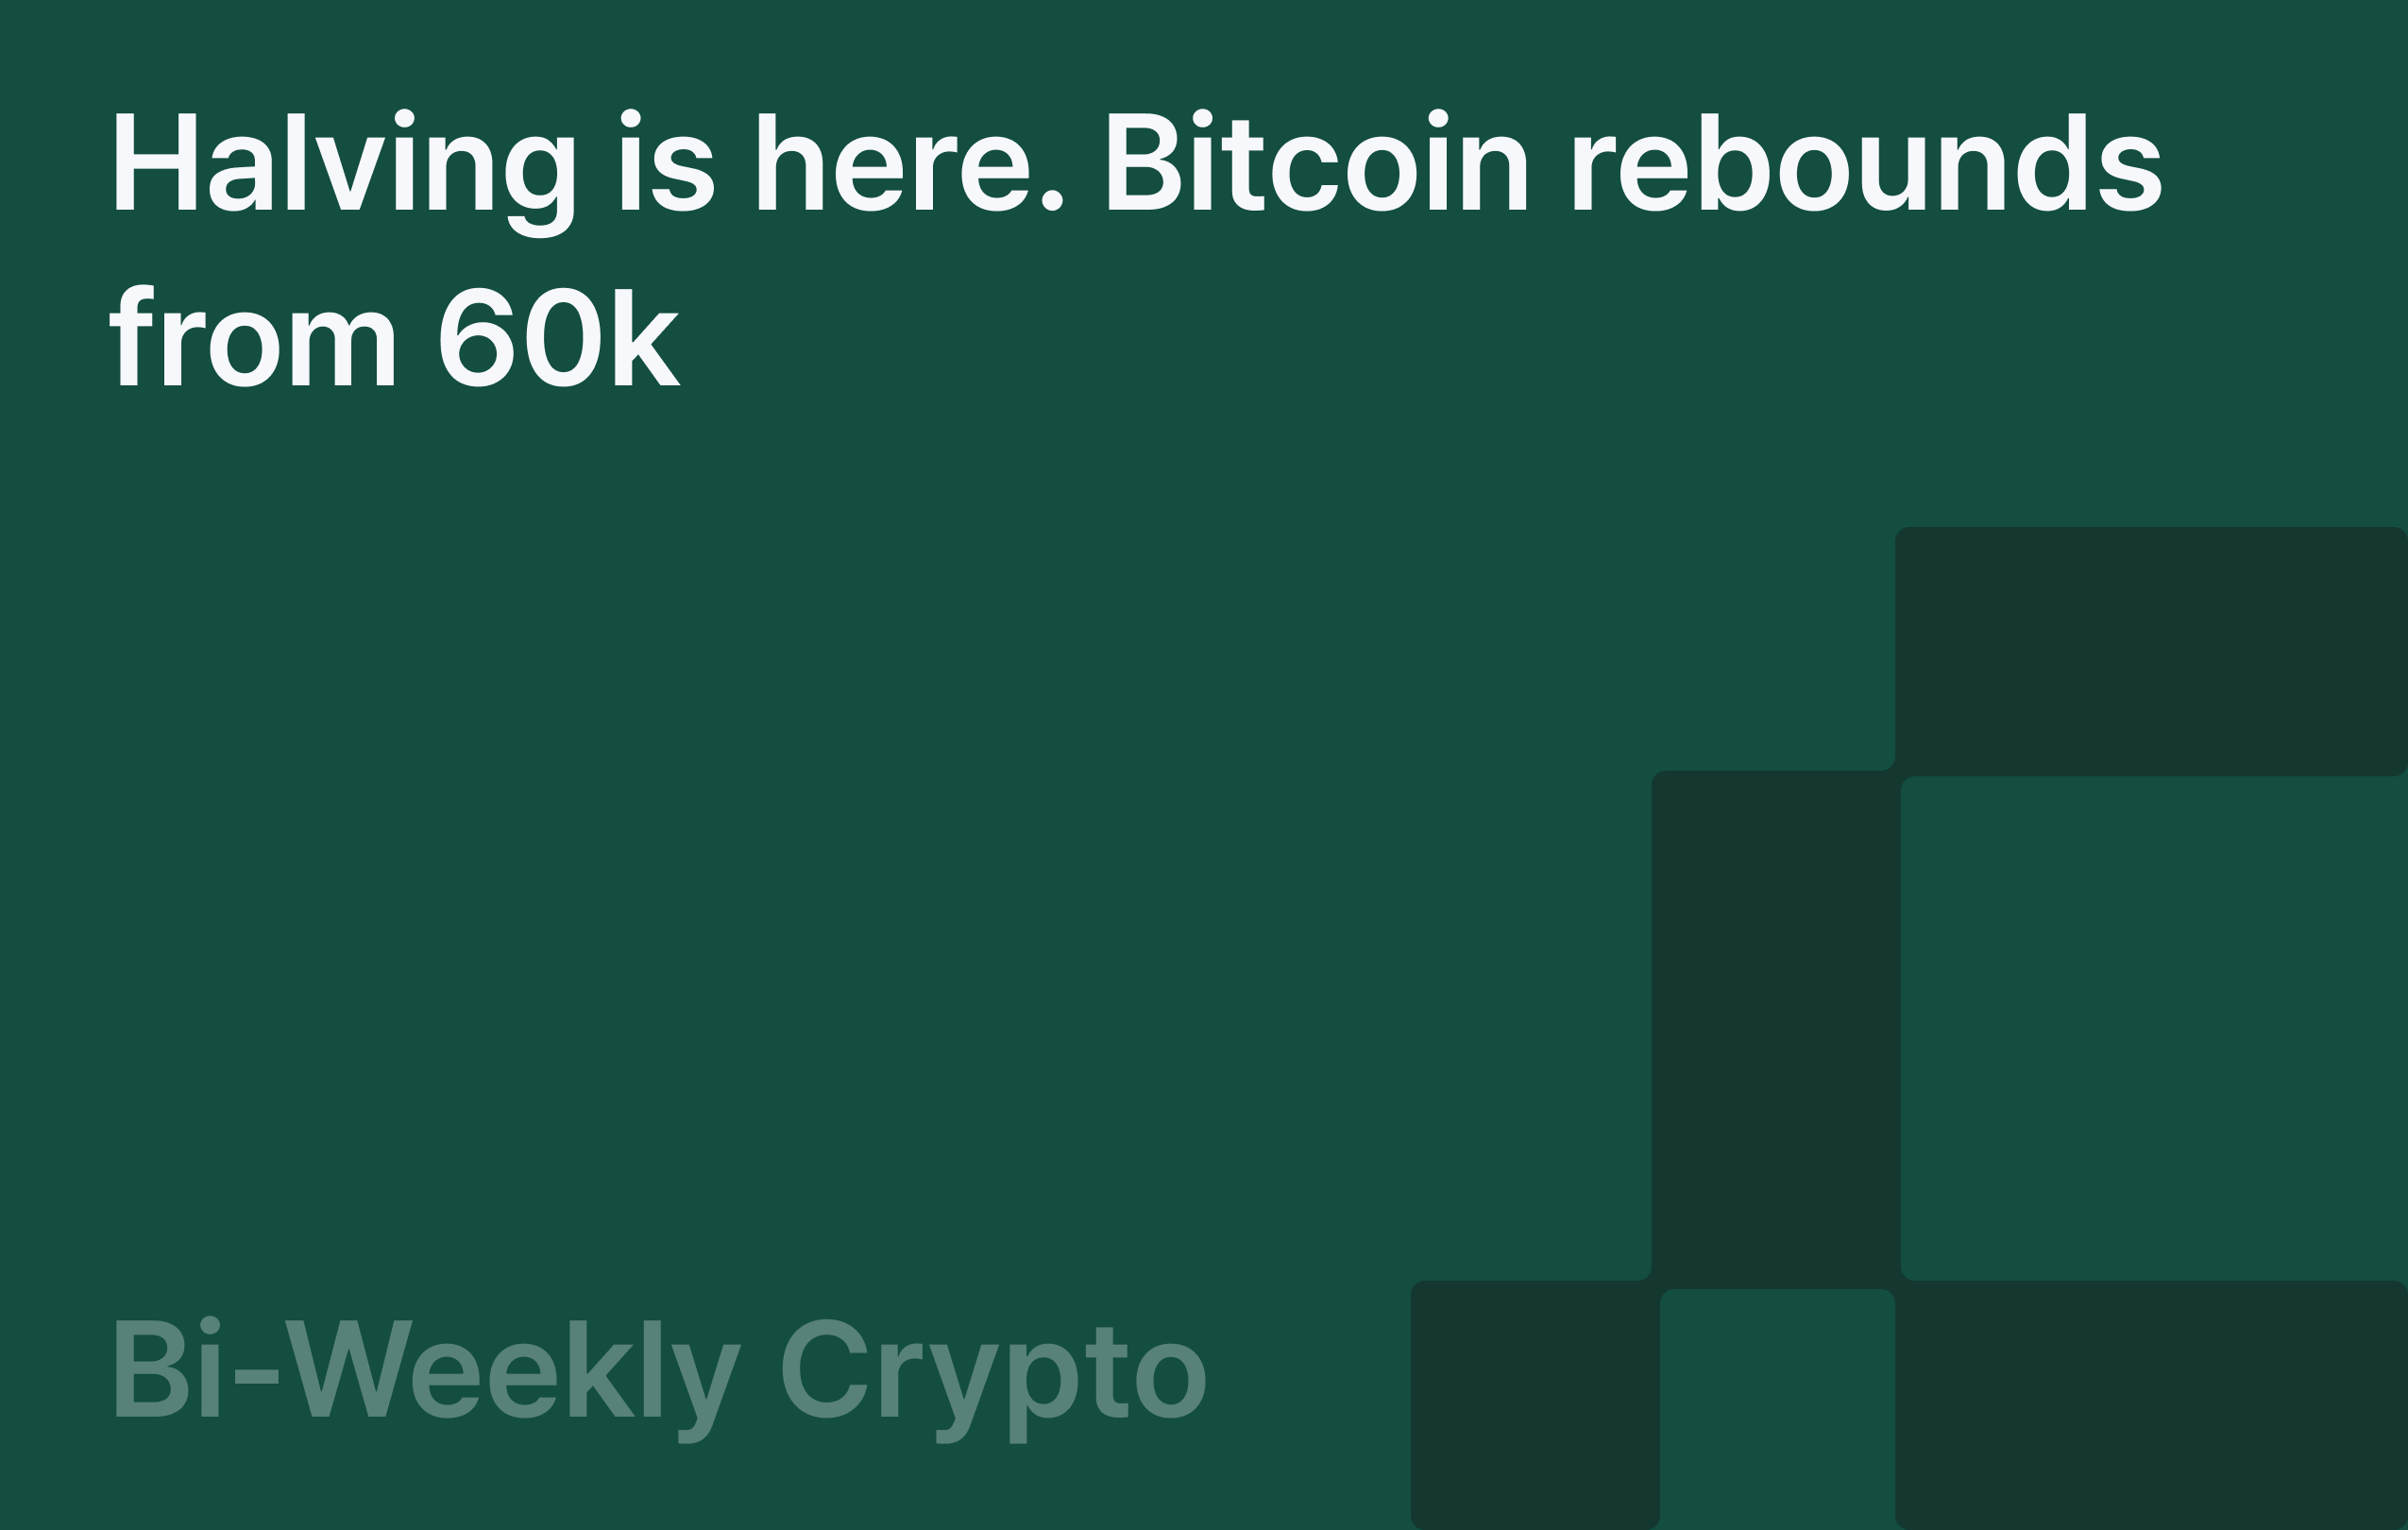 Bi-Weekly Crypto: Halving is here. Bitcoin rebounds from 60k 